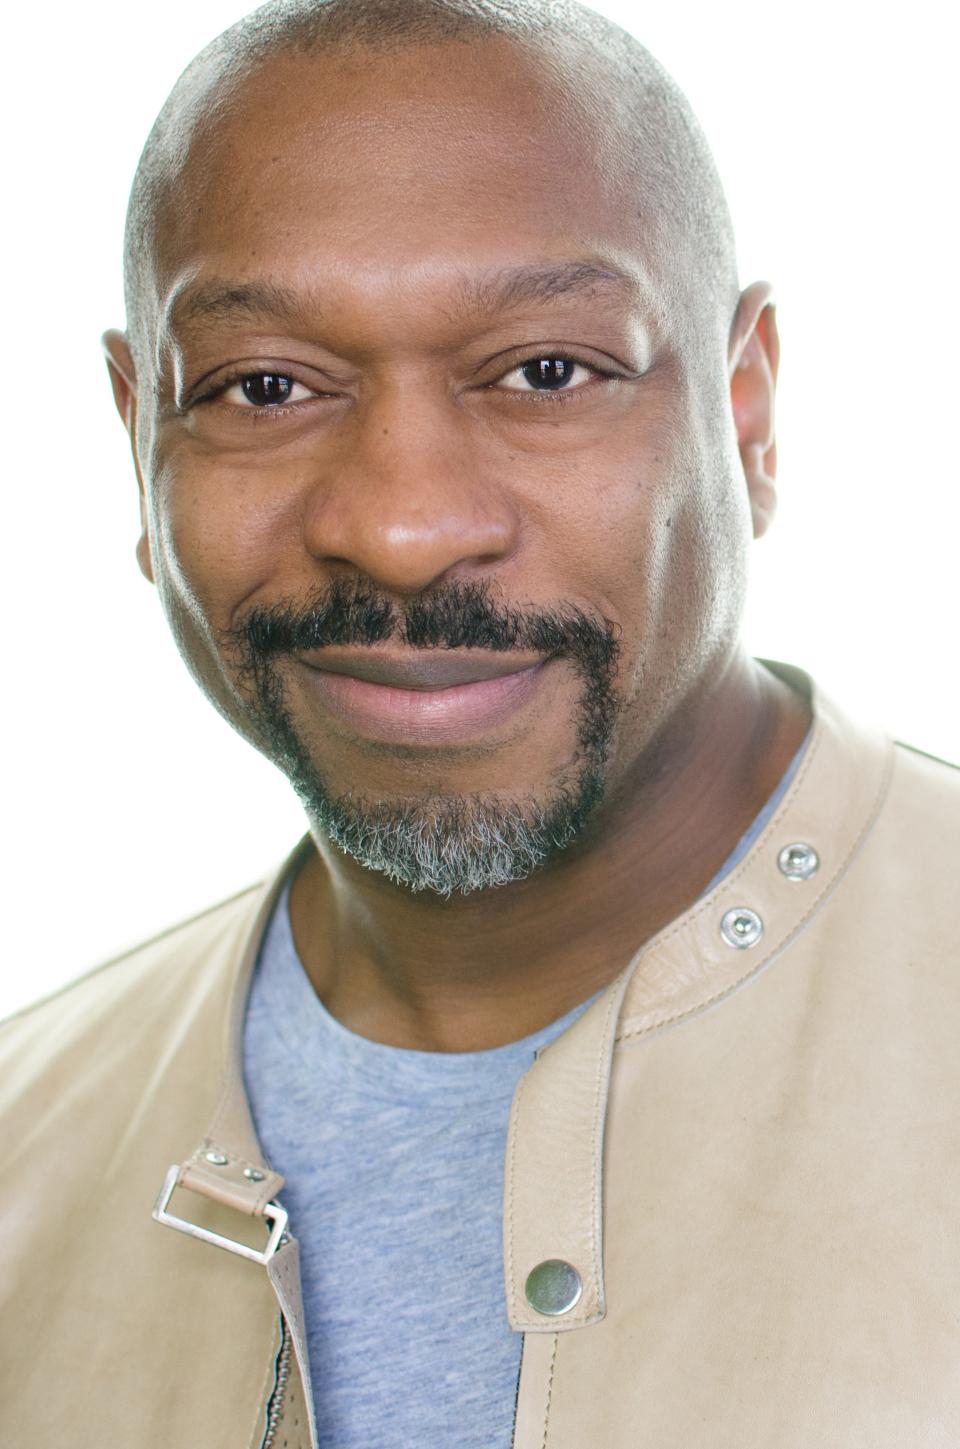 Stage actor and recording artist Alton Fitzgerald White will be the keynote speaker at the Brothers of the Desert's Wellness Summit on Nov. 12, 2022.